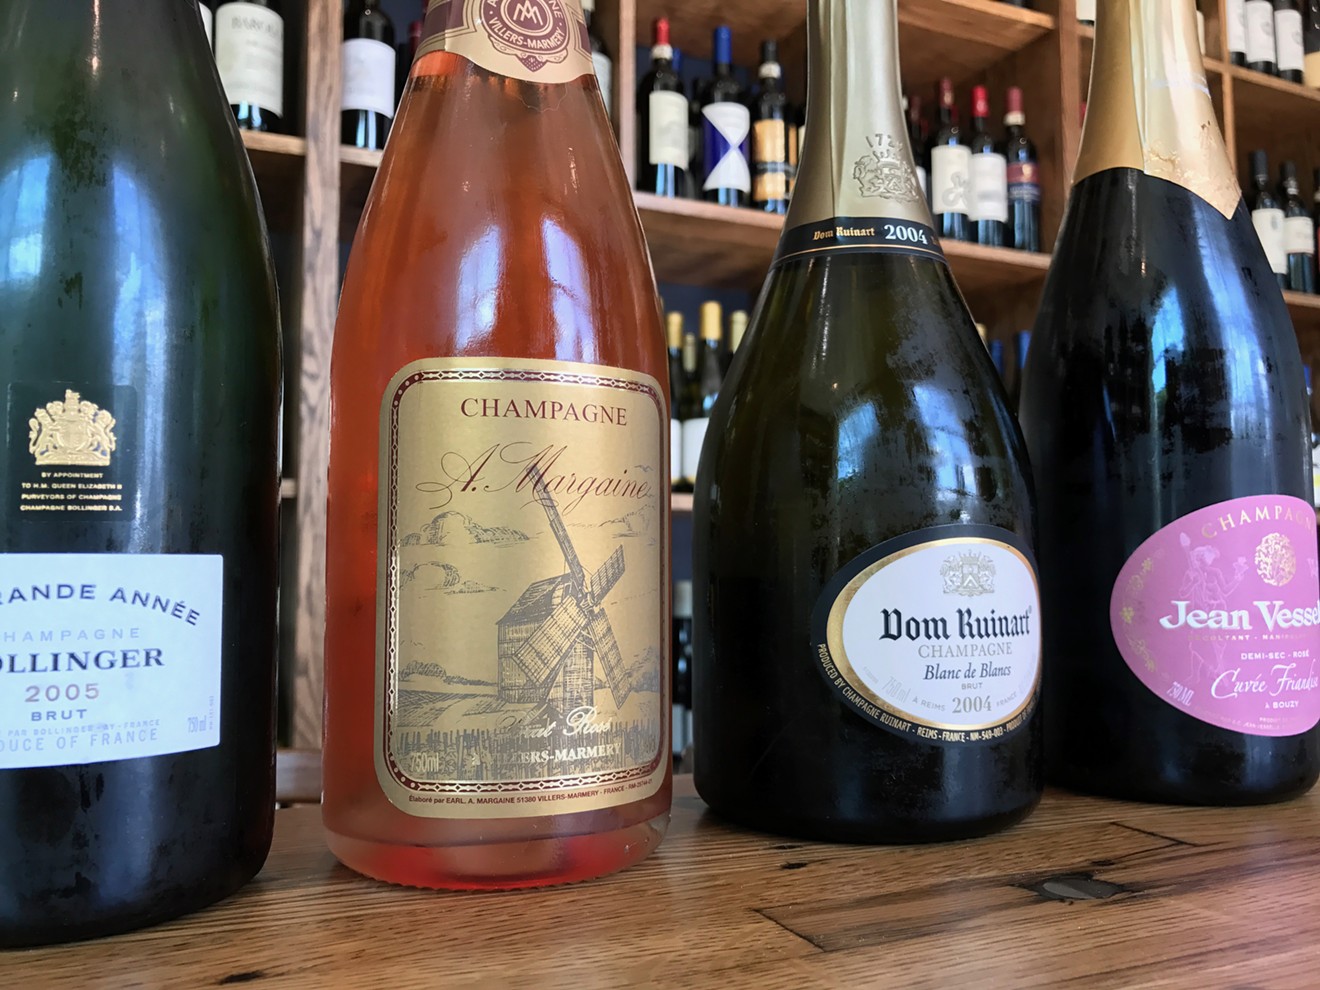 Owner and wine director Shawn Virene of À Bouzy will offer top Champagnes at at 25 percent markup, 25 percent less than the standard 50 percent markup used by retailers and nearly 200 percent less than the common restaurant markup.